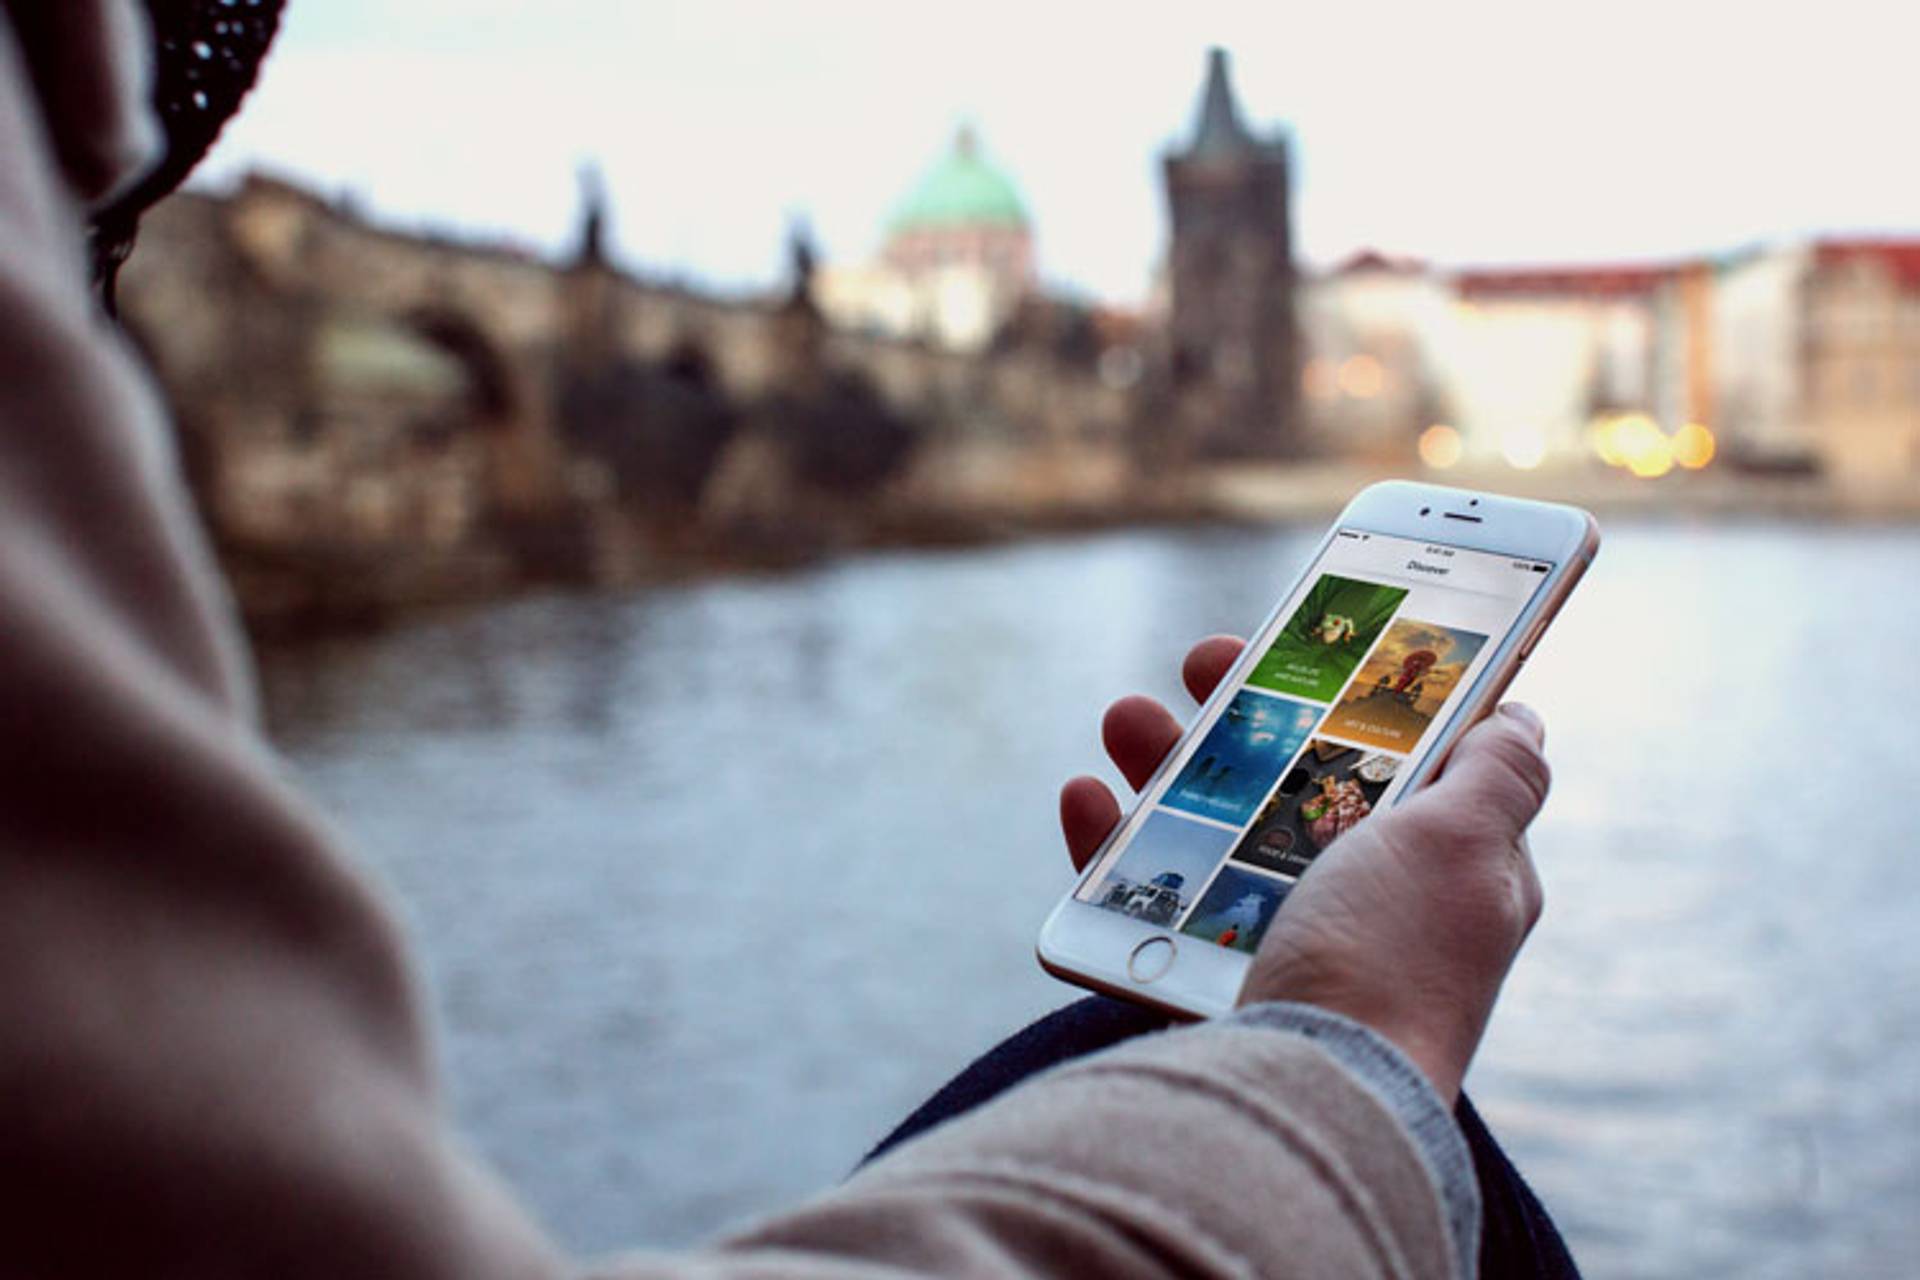 Trips is a photo-sharing app for travel junkies